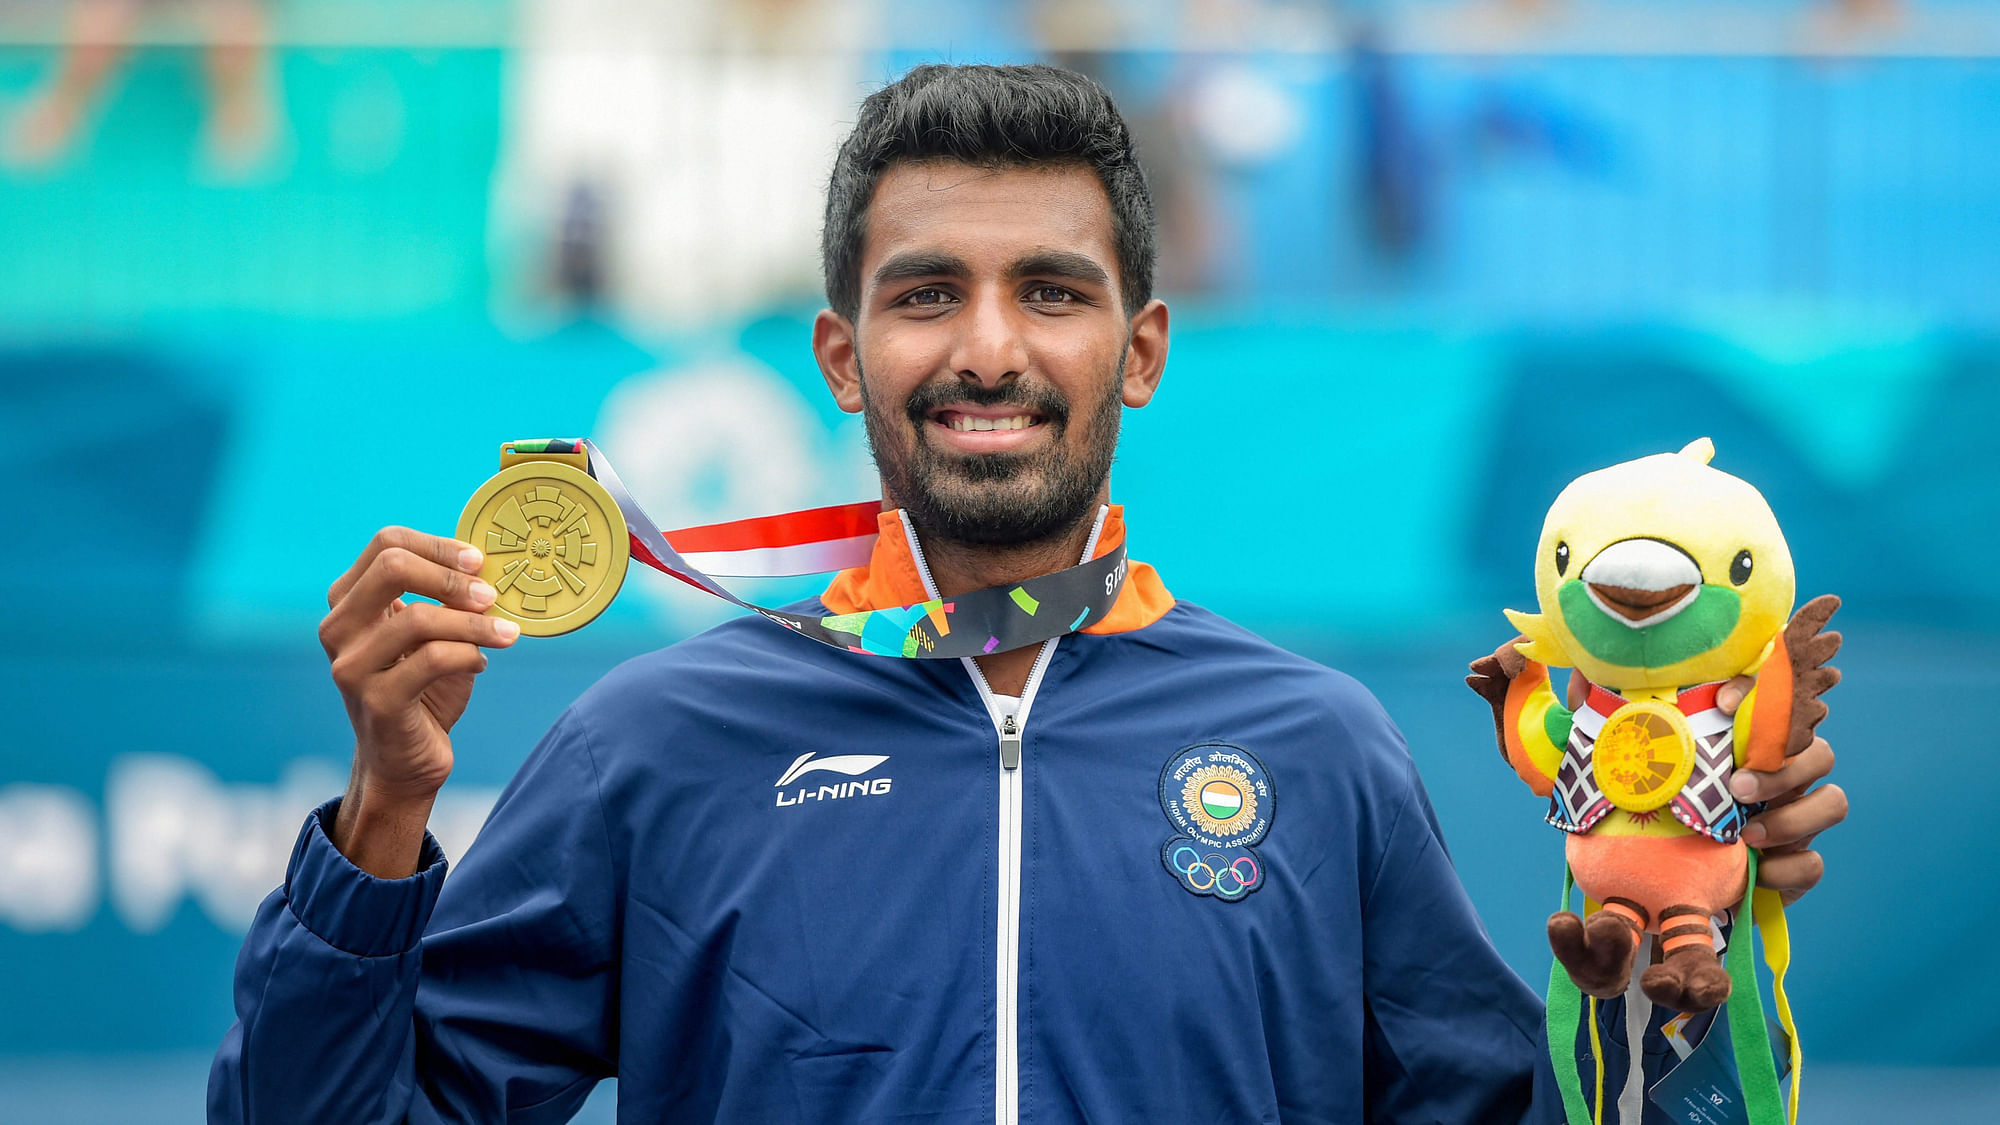 File picture of Prajnesh Gunneswaran posing with his bronze medal during the medal ceremony for the men’s singles tennis event at the 2018 Asian Games.